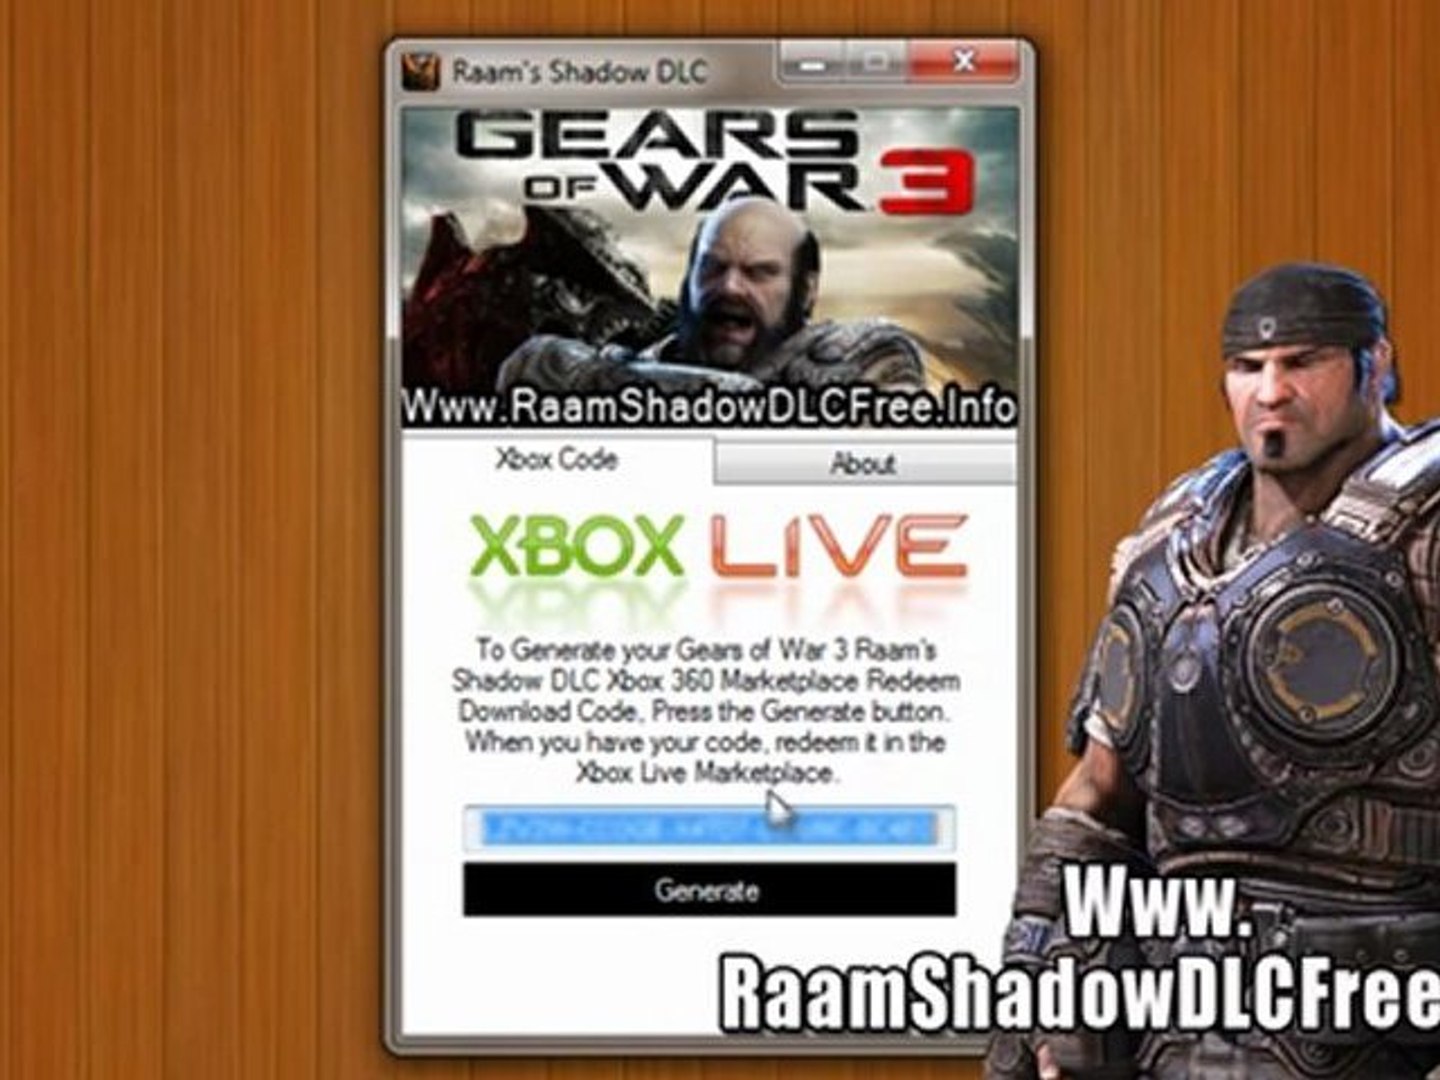 How To Get Gears of War 3 Raam's Shadow Free on Xbox - video Dailymotion